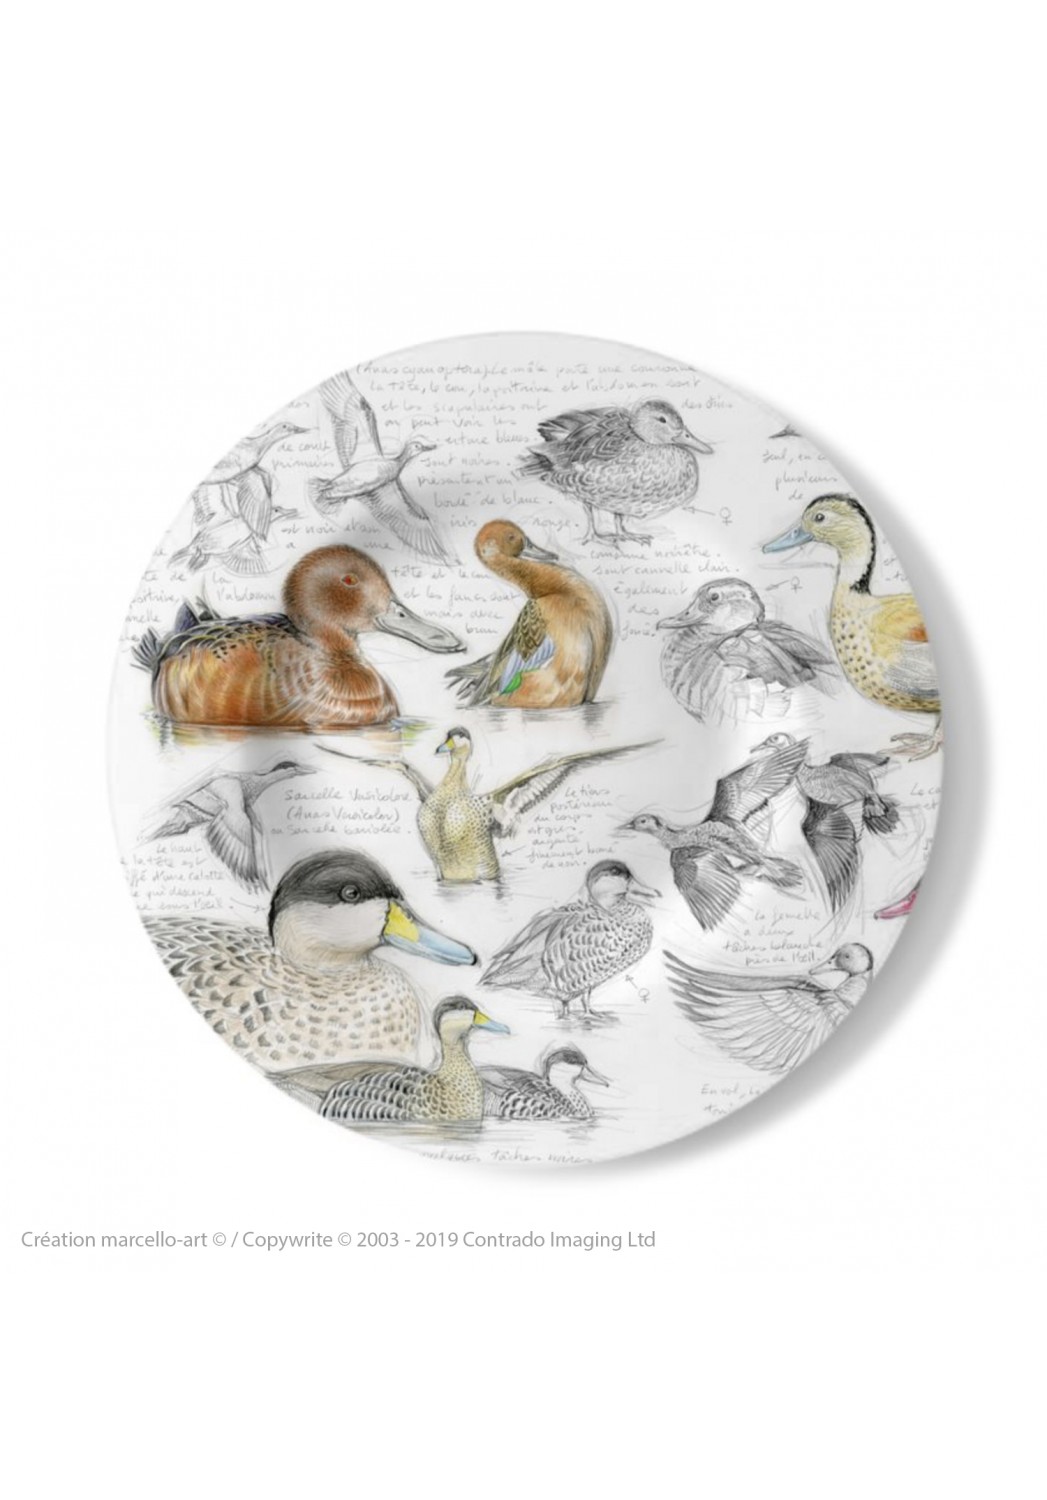 Marcello-art: Decorating Plates Decoration plates 239 A Cinnamon teal, from Brazil, spotted and versicolor